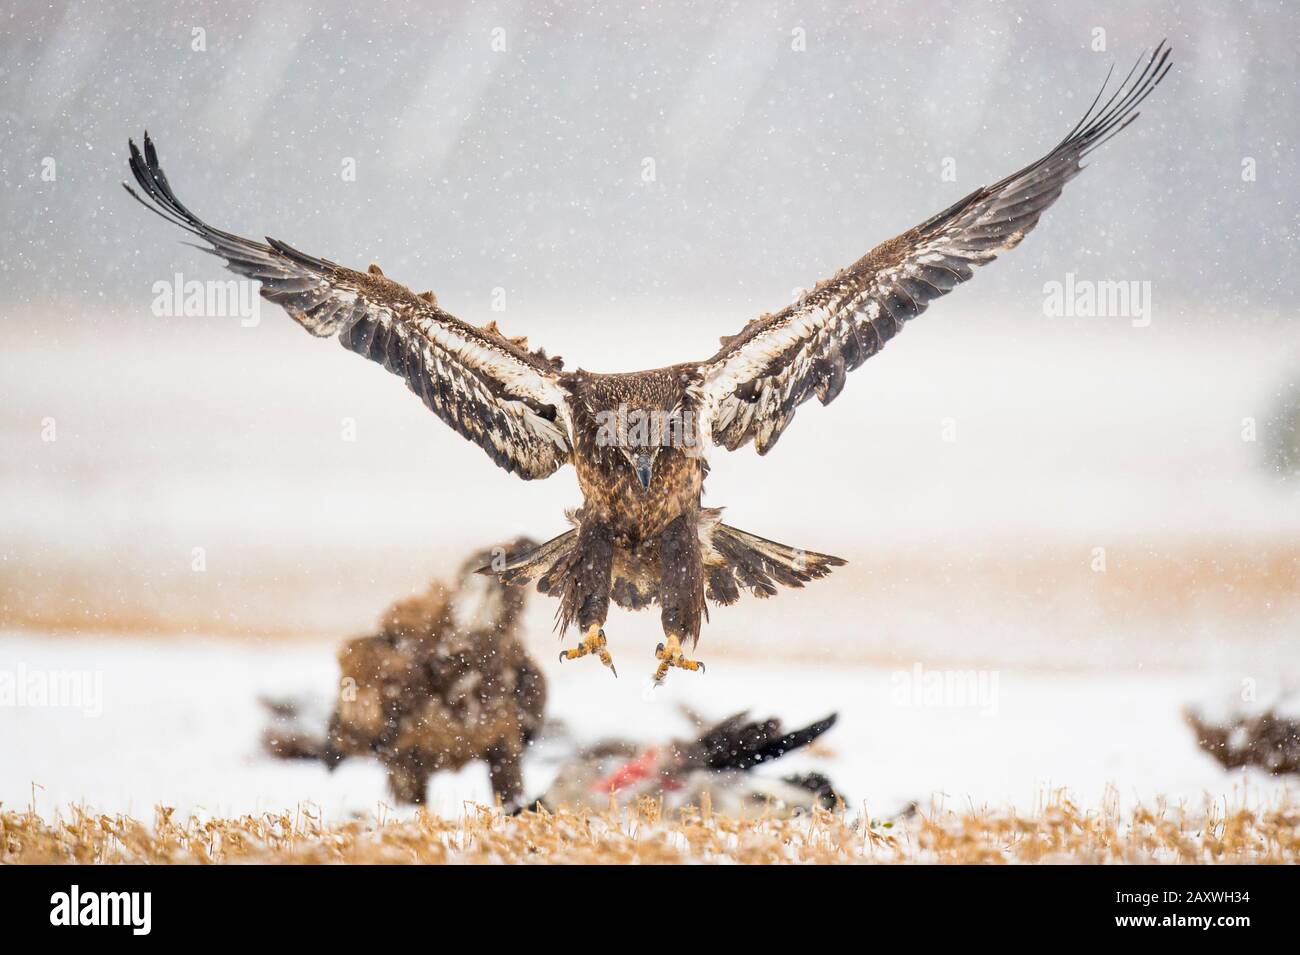 A juvenile Bald Eagle flies in a light snowfall on a cold winter day in an open field with carcasses on the ground. Stock Photo